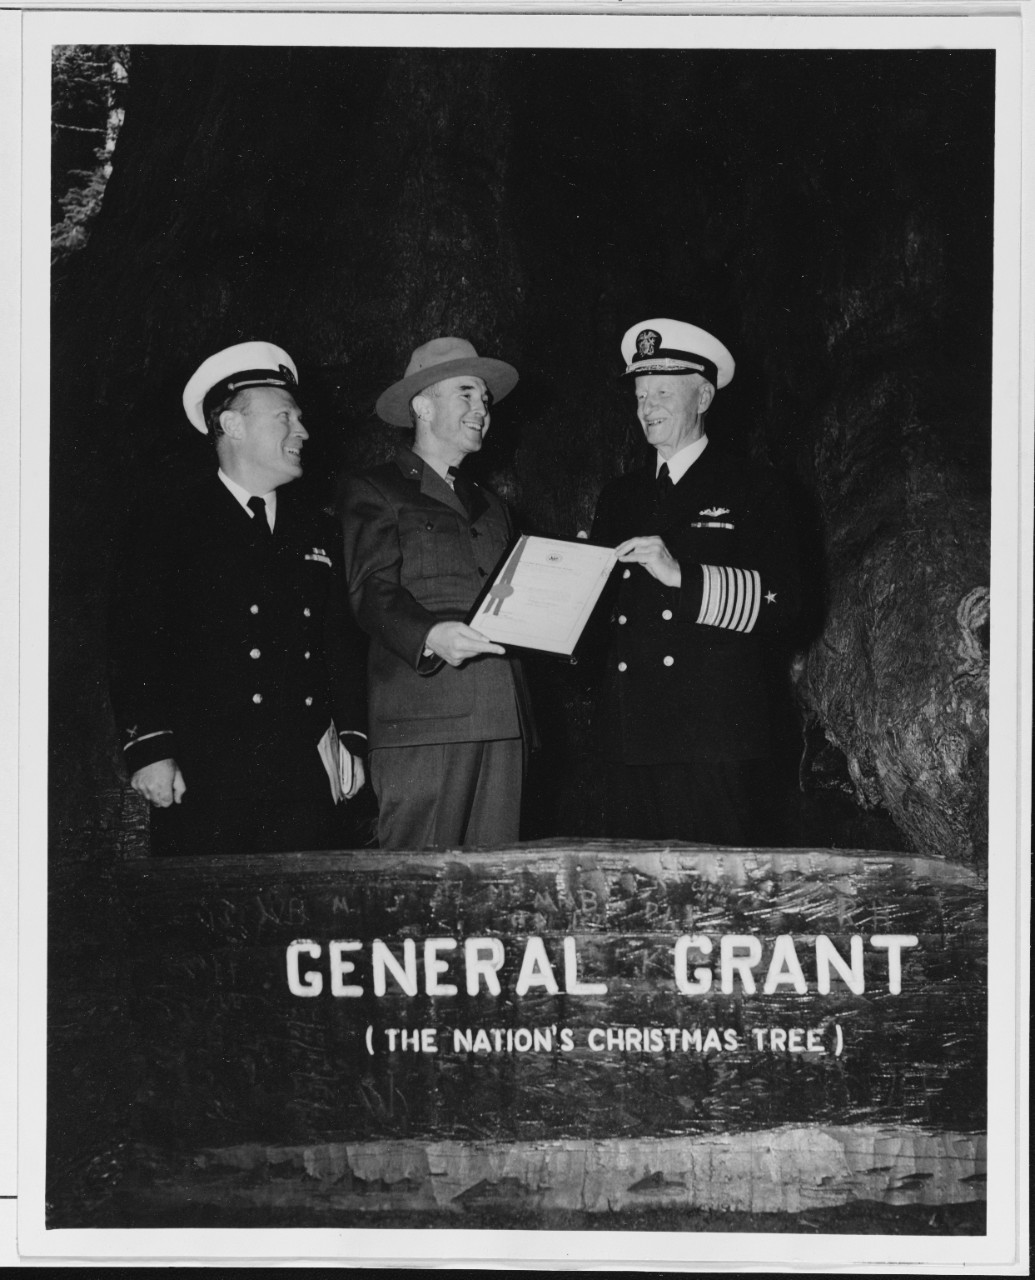 Fleet Admiral Nimitz Holds the Certificate for the "General Grant Tree"